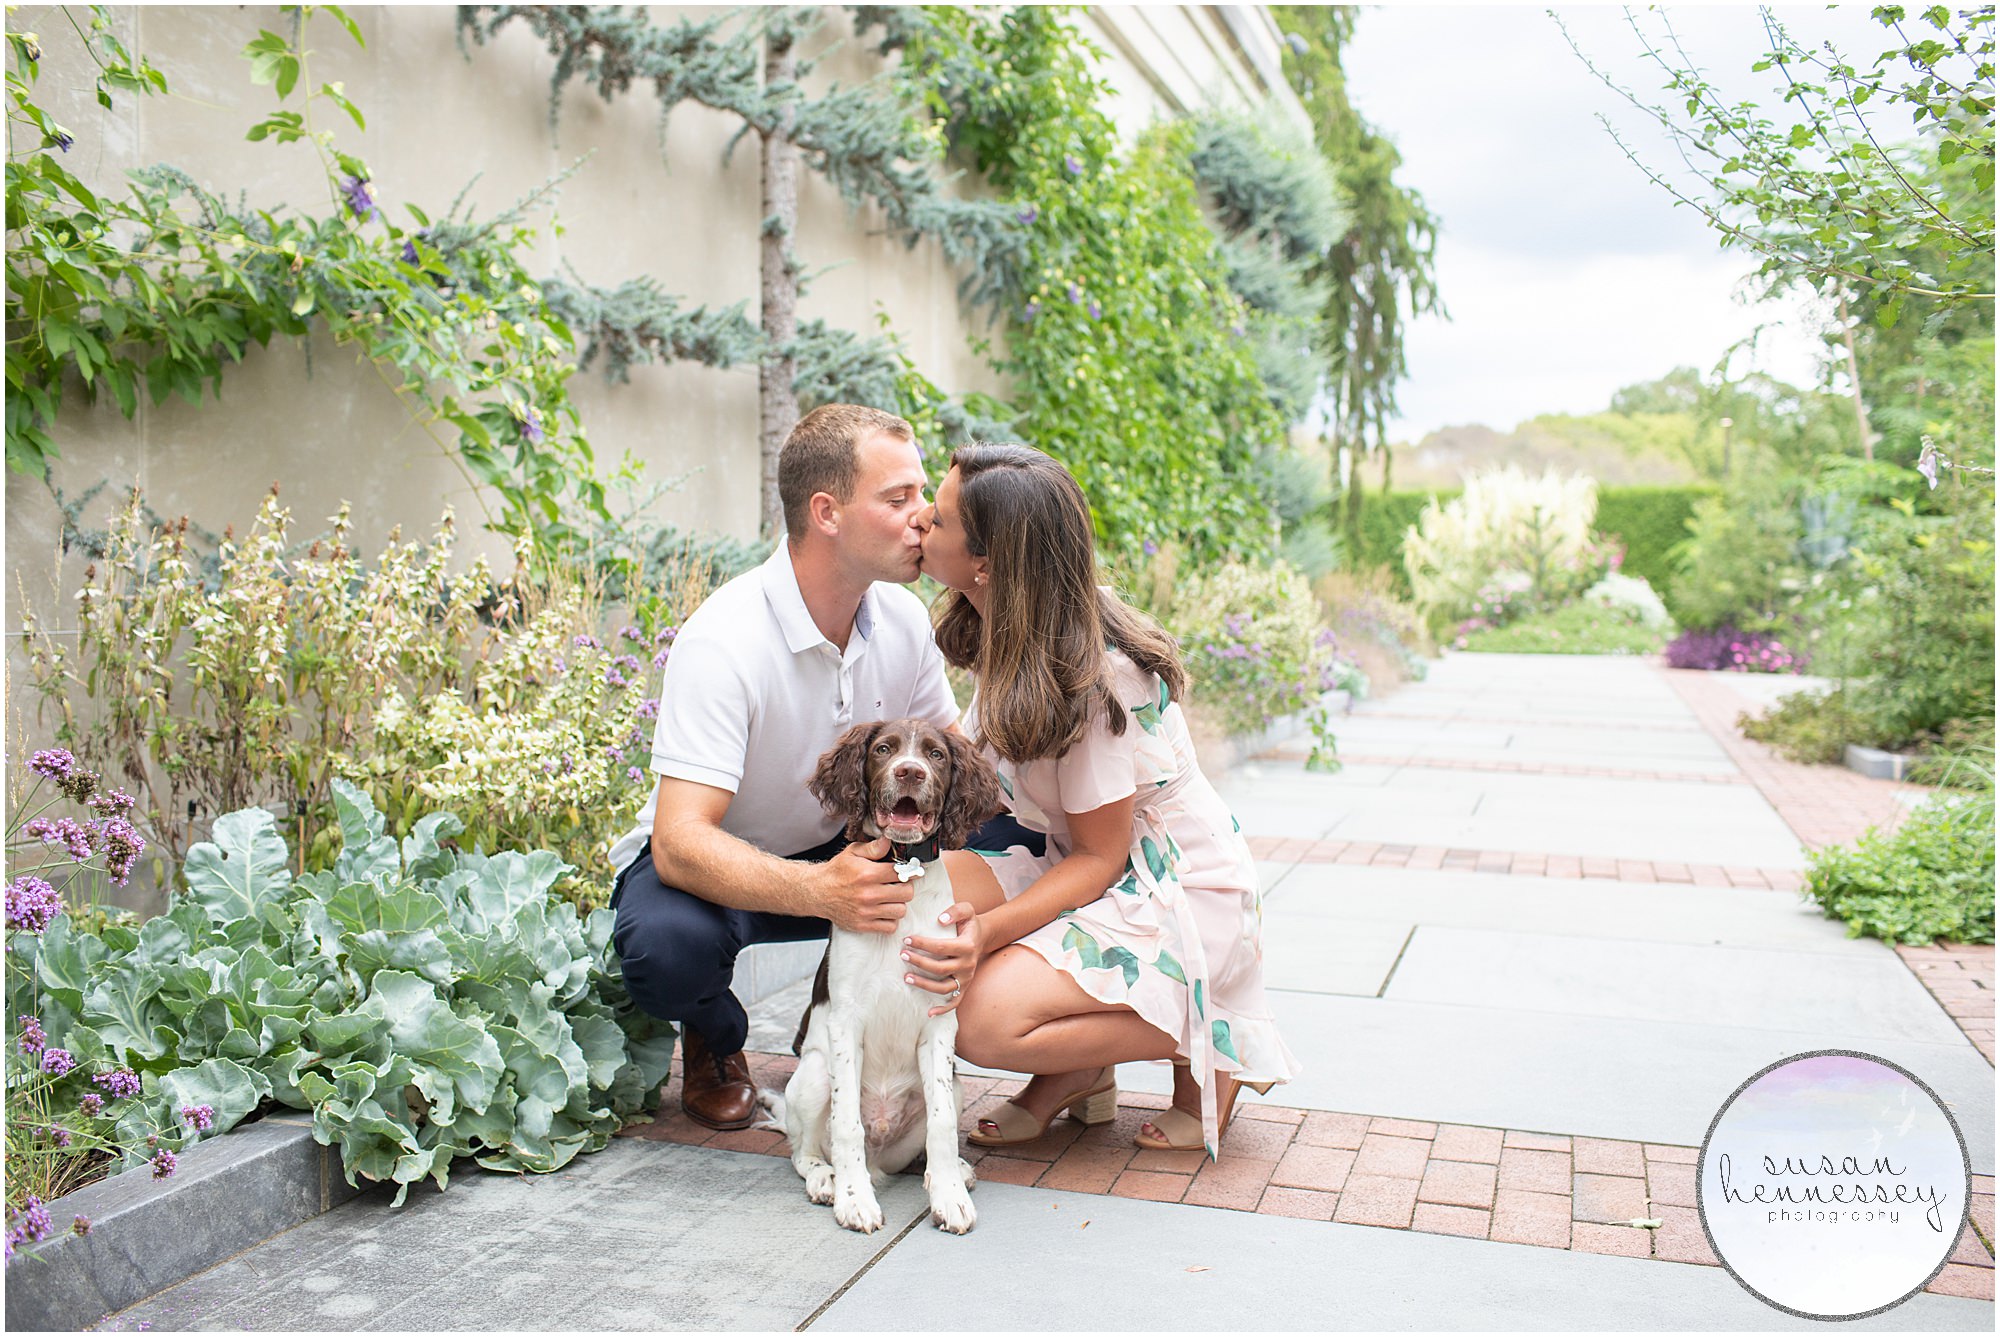 An engaged couple kiss while photographed with their dog.